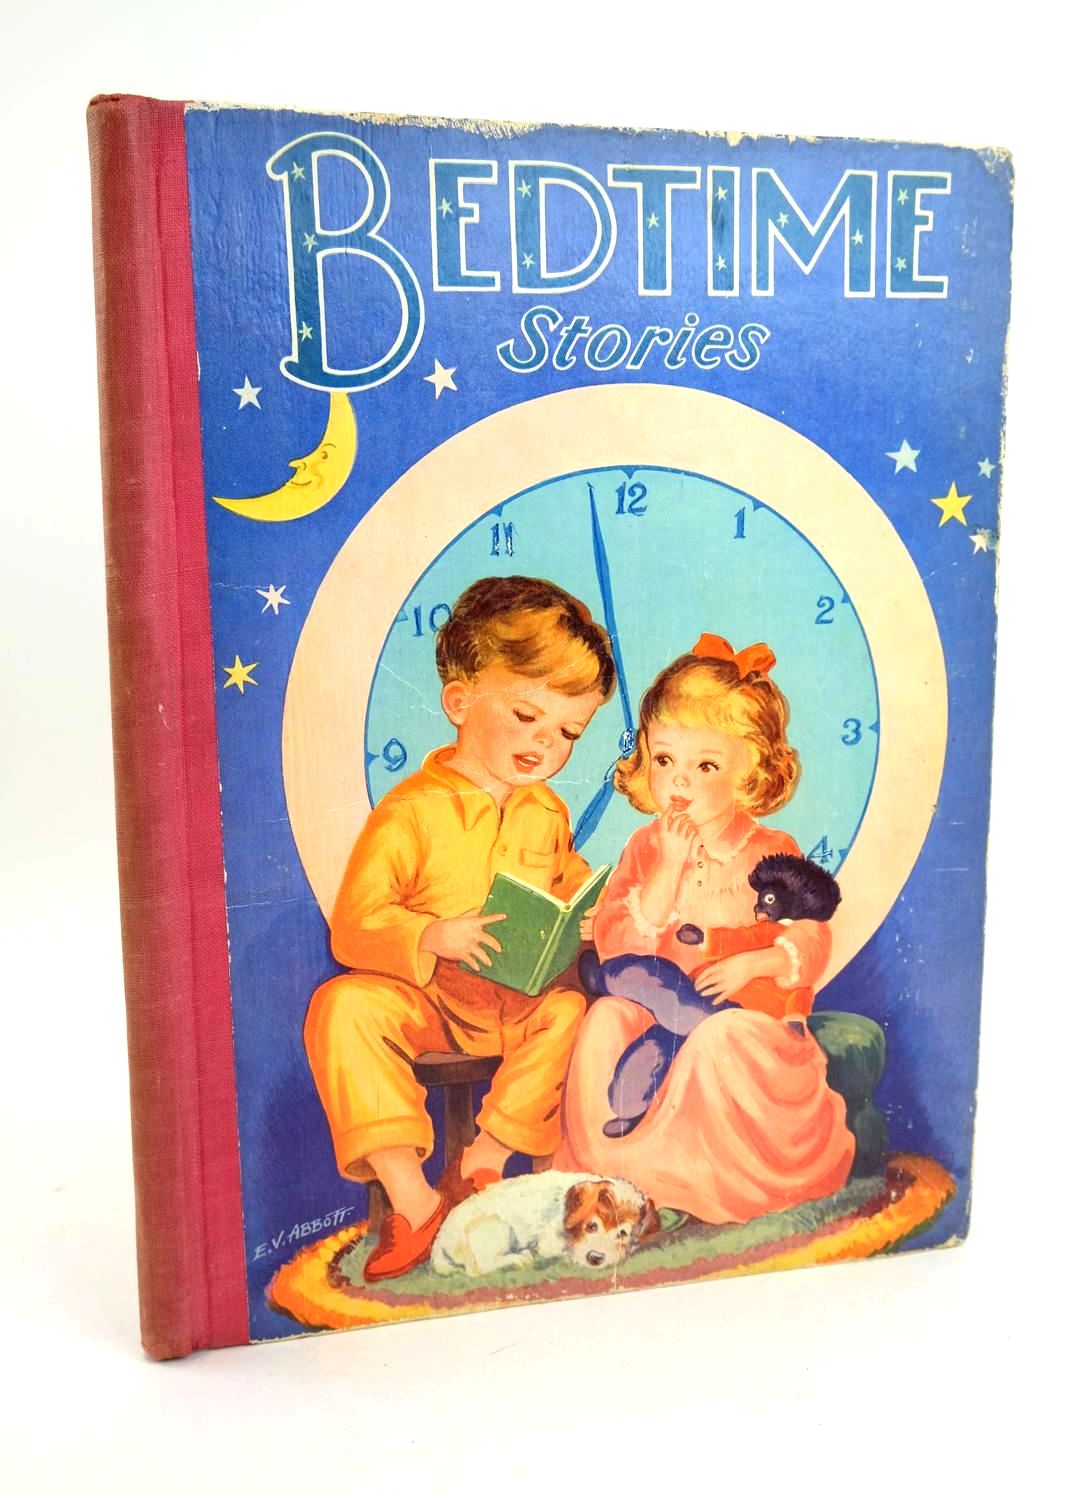 Photo of BEDTIME STORIES published by Birn Brothers Ltd. (STOCK CODE: 1318932)  for sale by Stella & Rose's Books